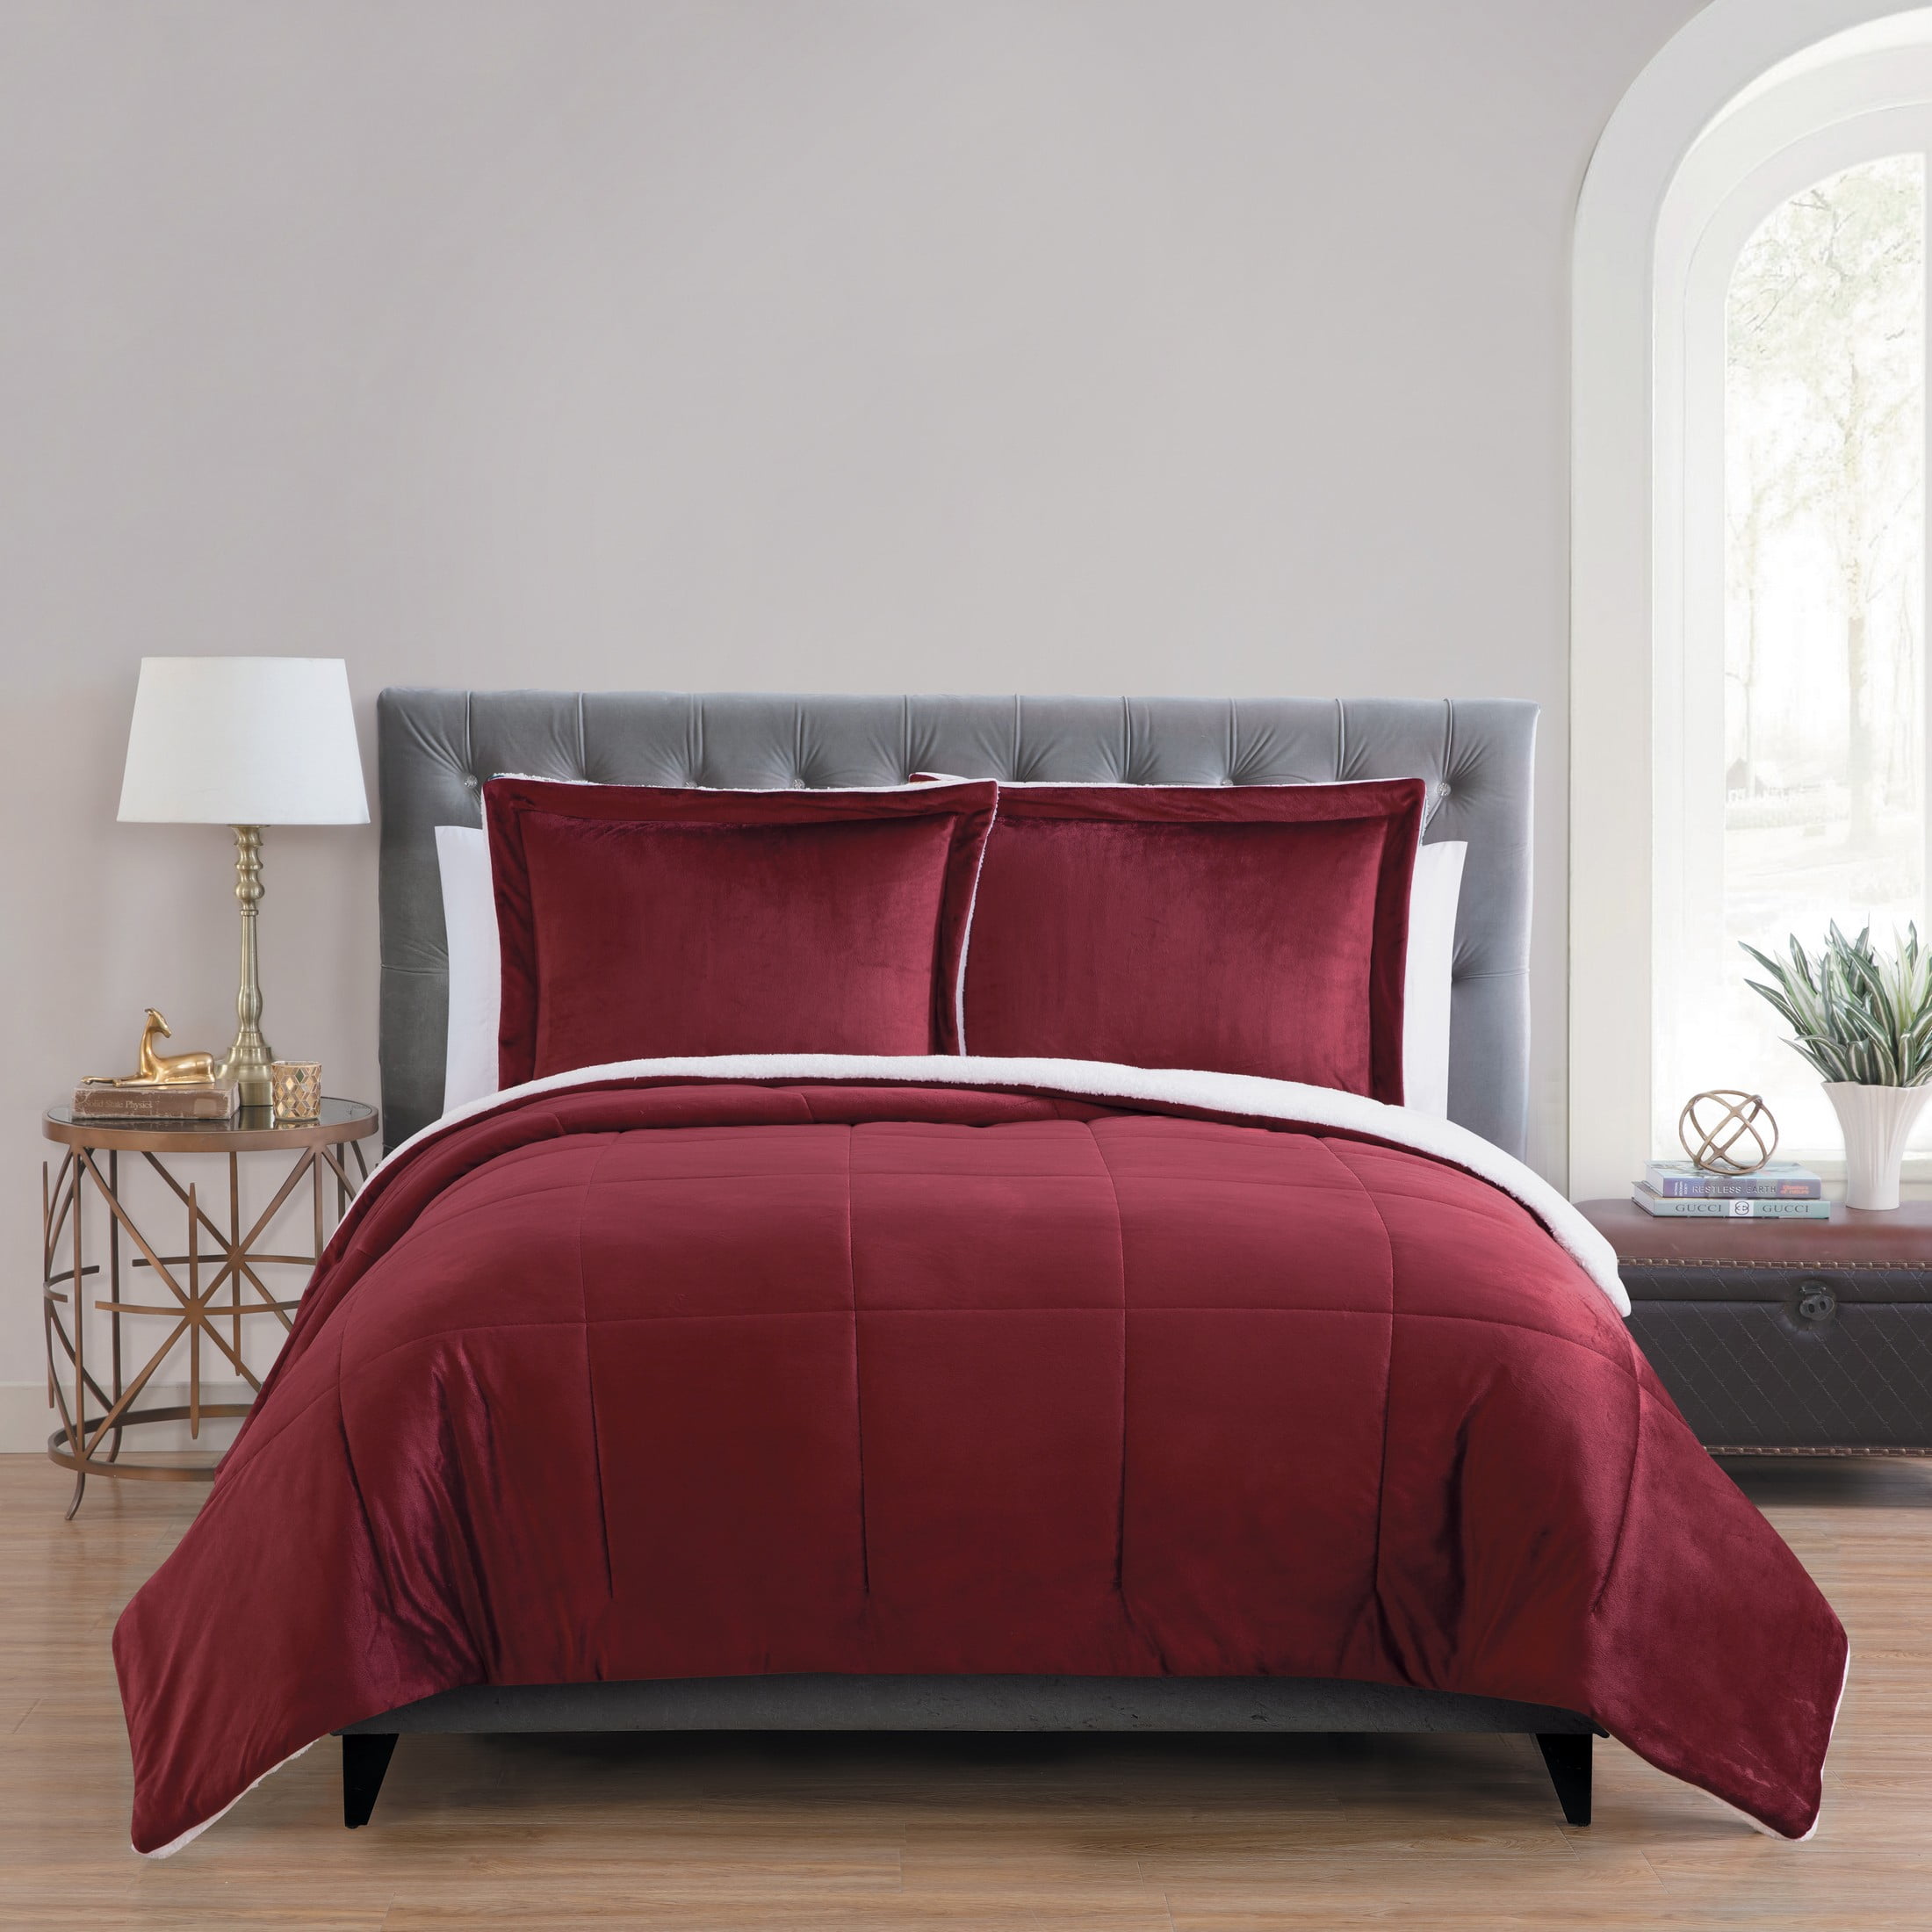 VCNY Home Micromink 3-Piece Deep Red Solid Polyester Comforter Set ...